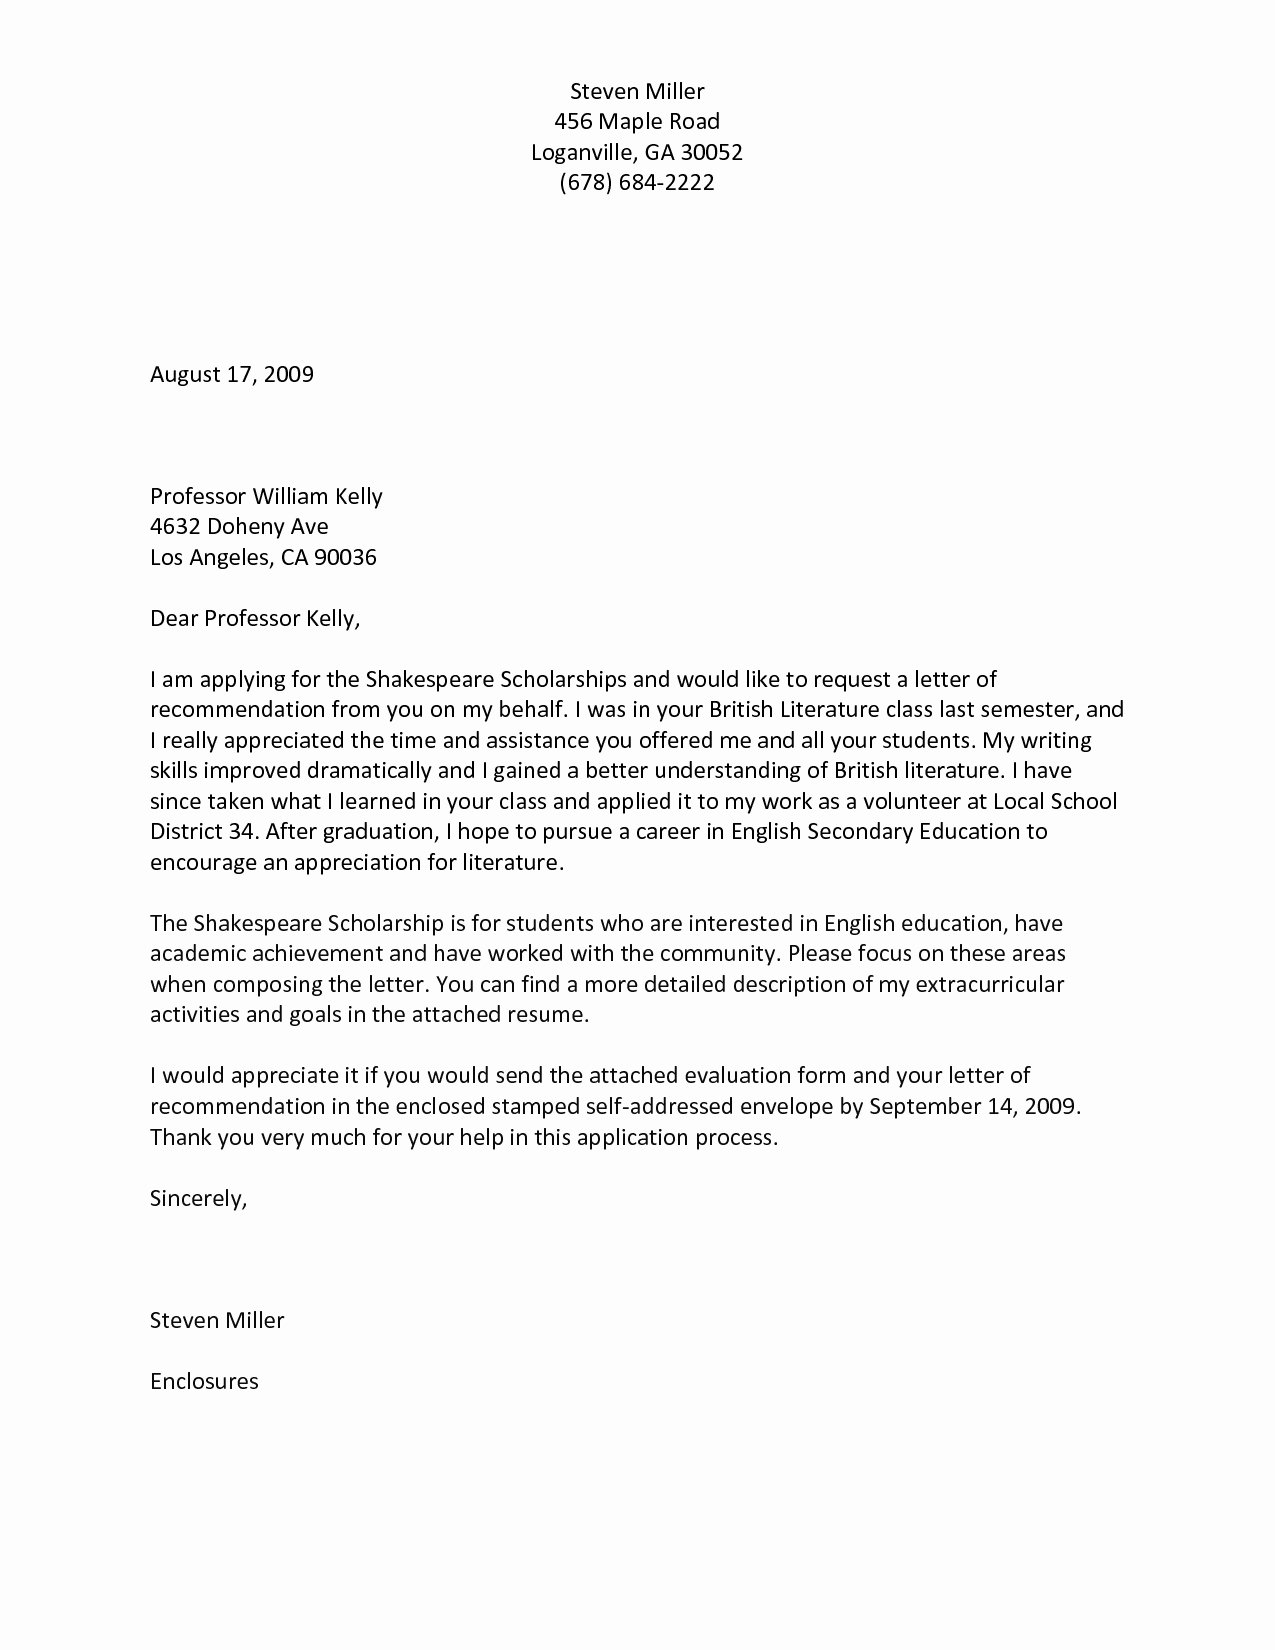 Request Letter Of Recommendation Sample Beautiful Letter Re Mendation Request Template Examples